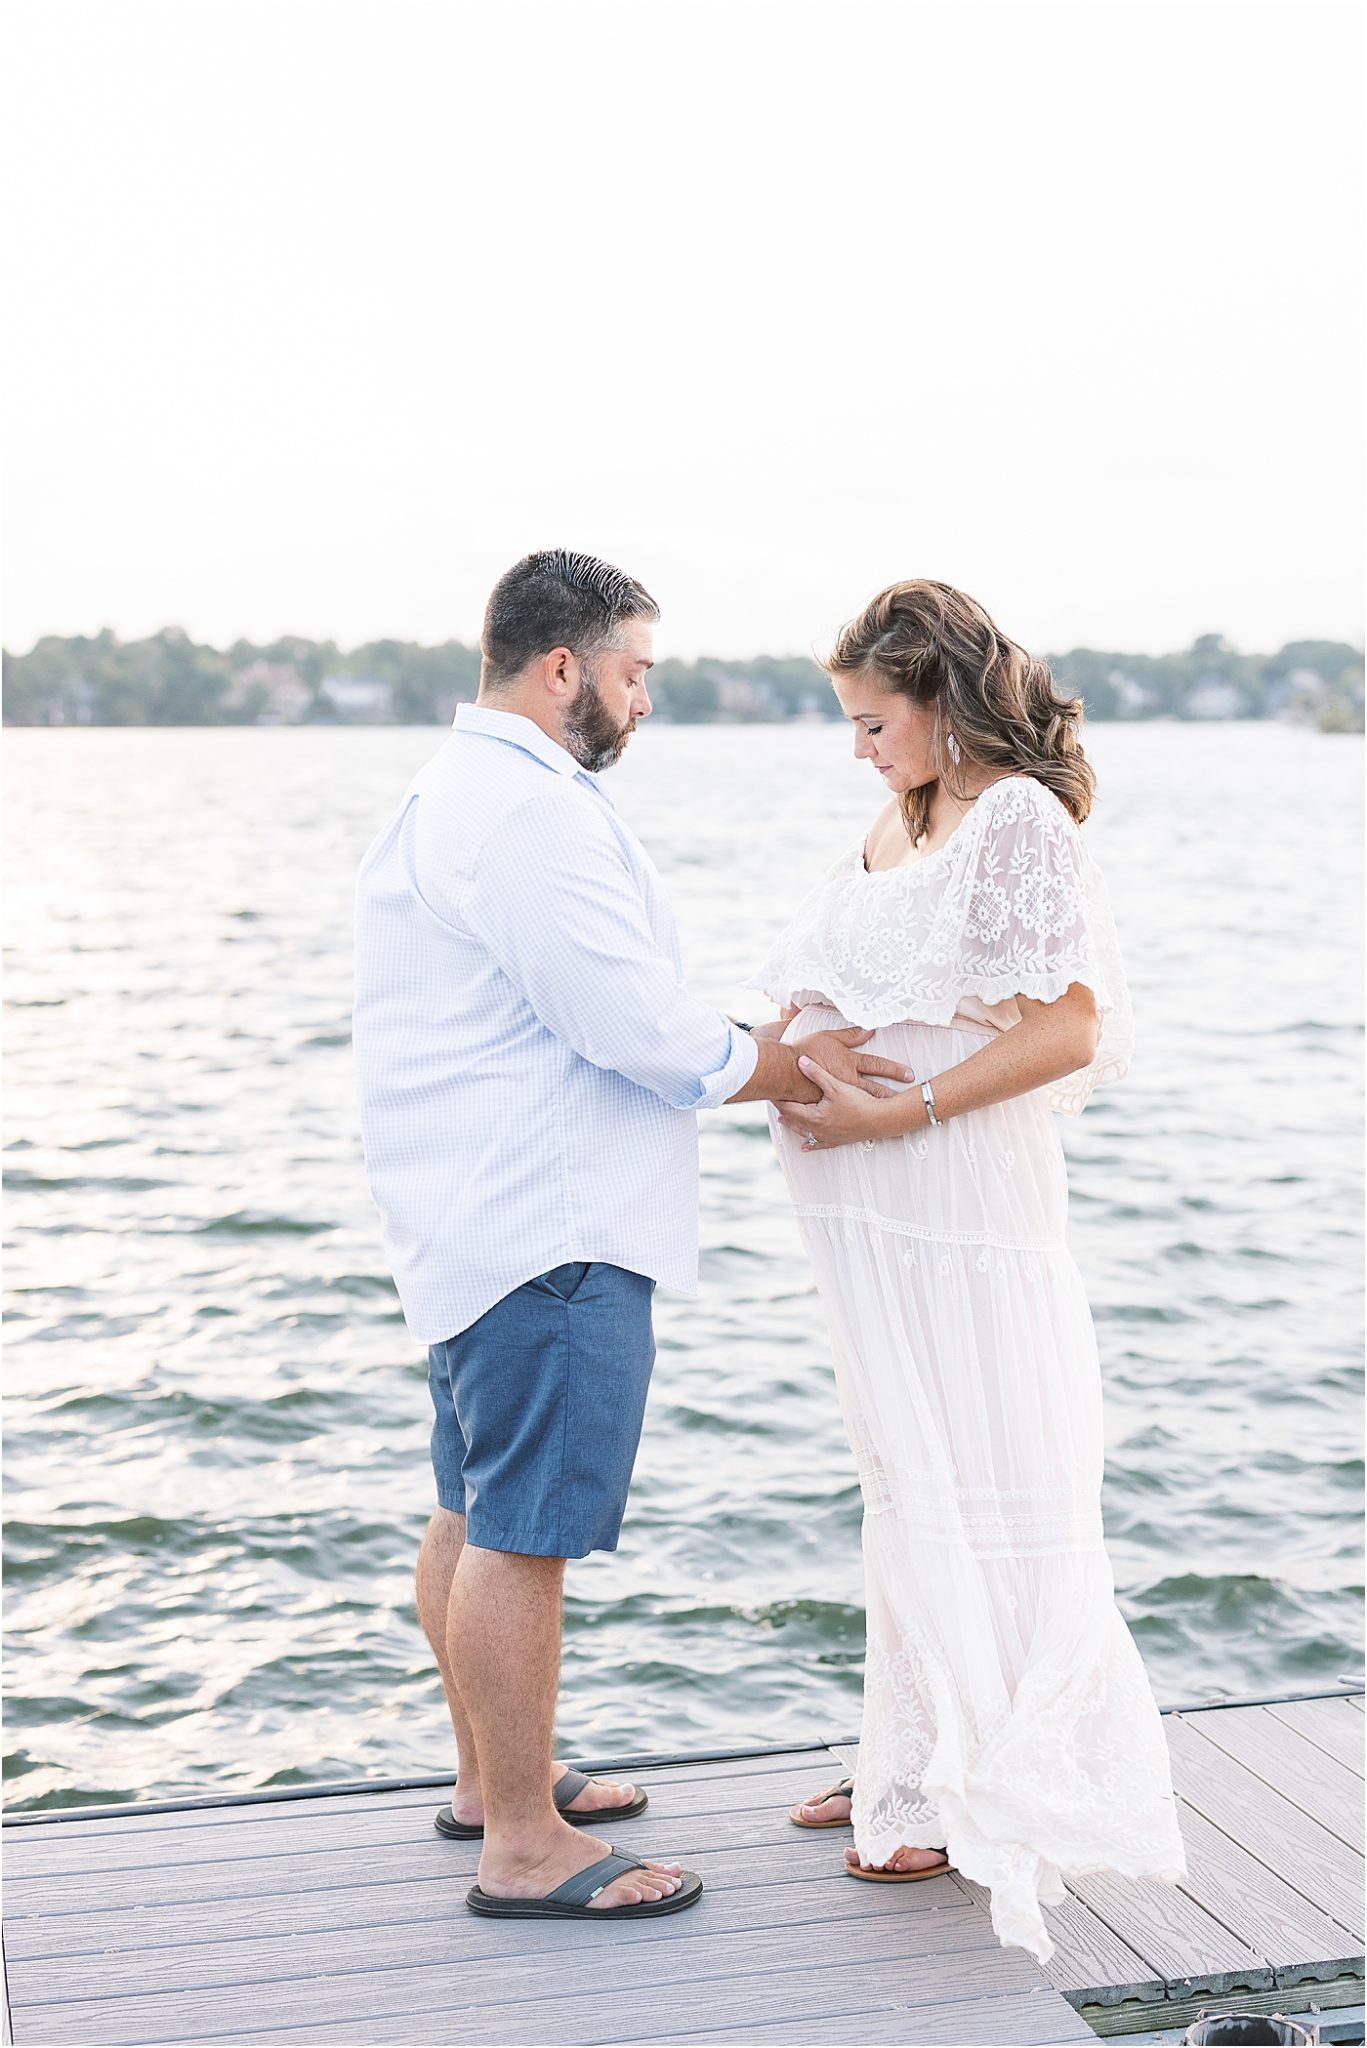 Geist Reservoir maternity session for expecting parents | Lindsay Konopa Photography